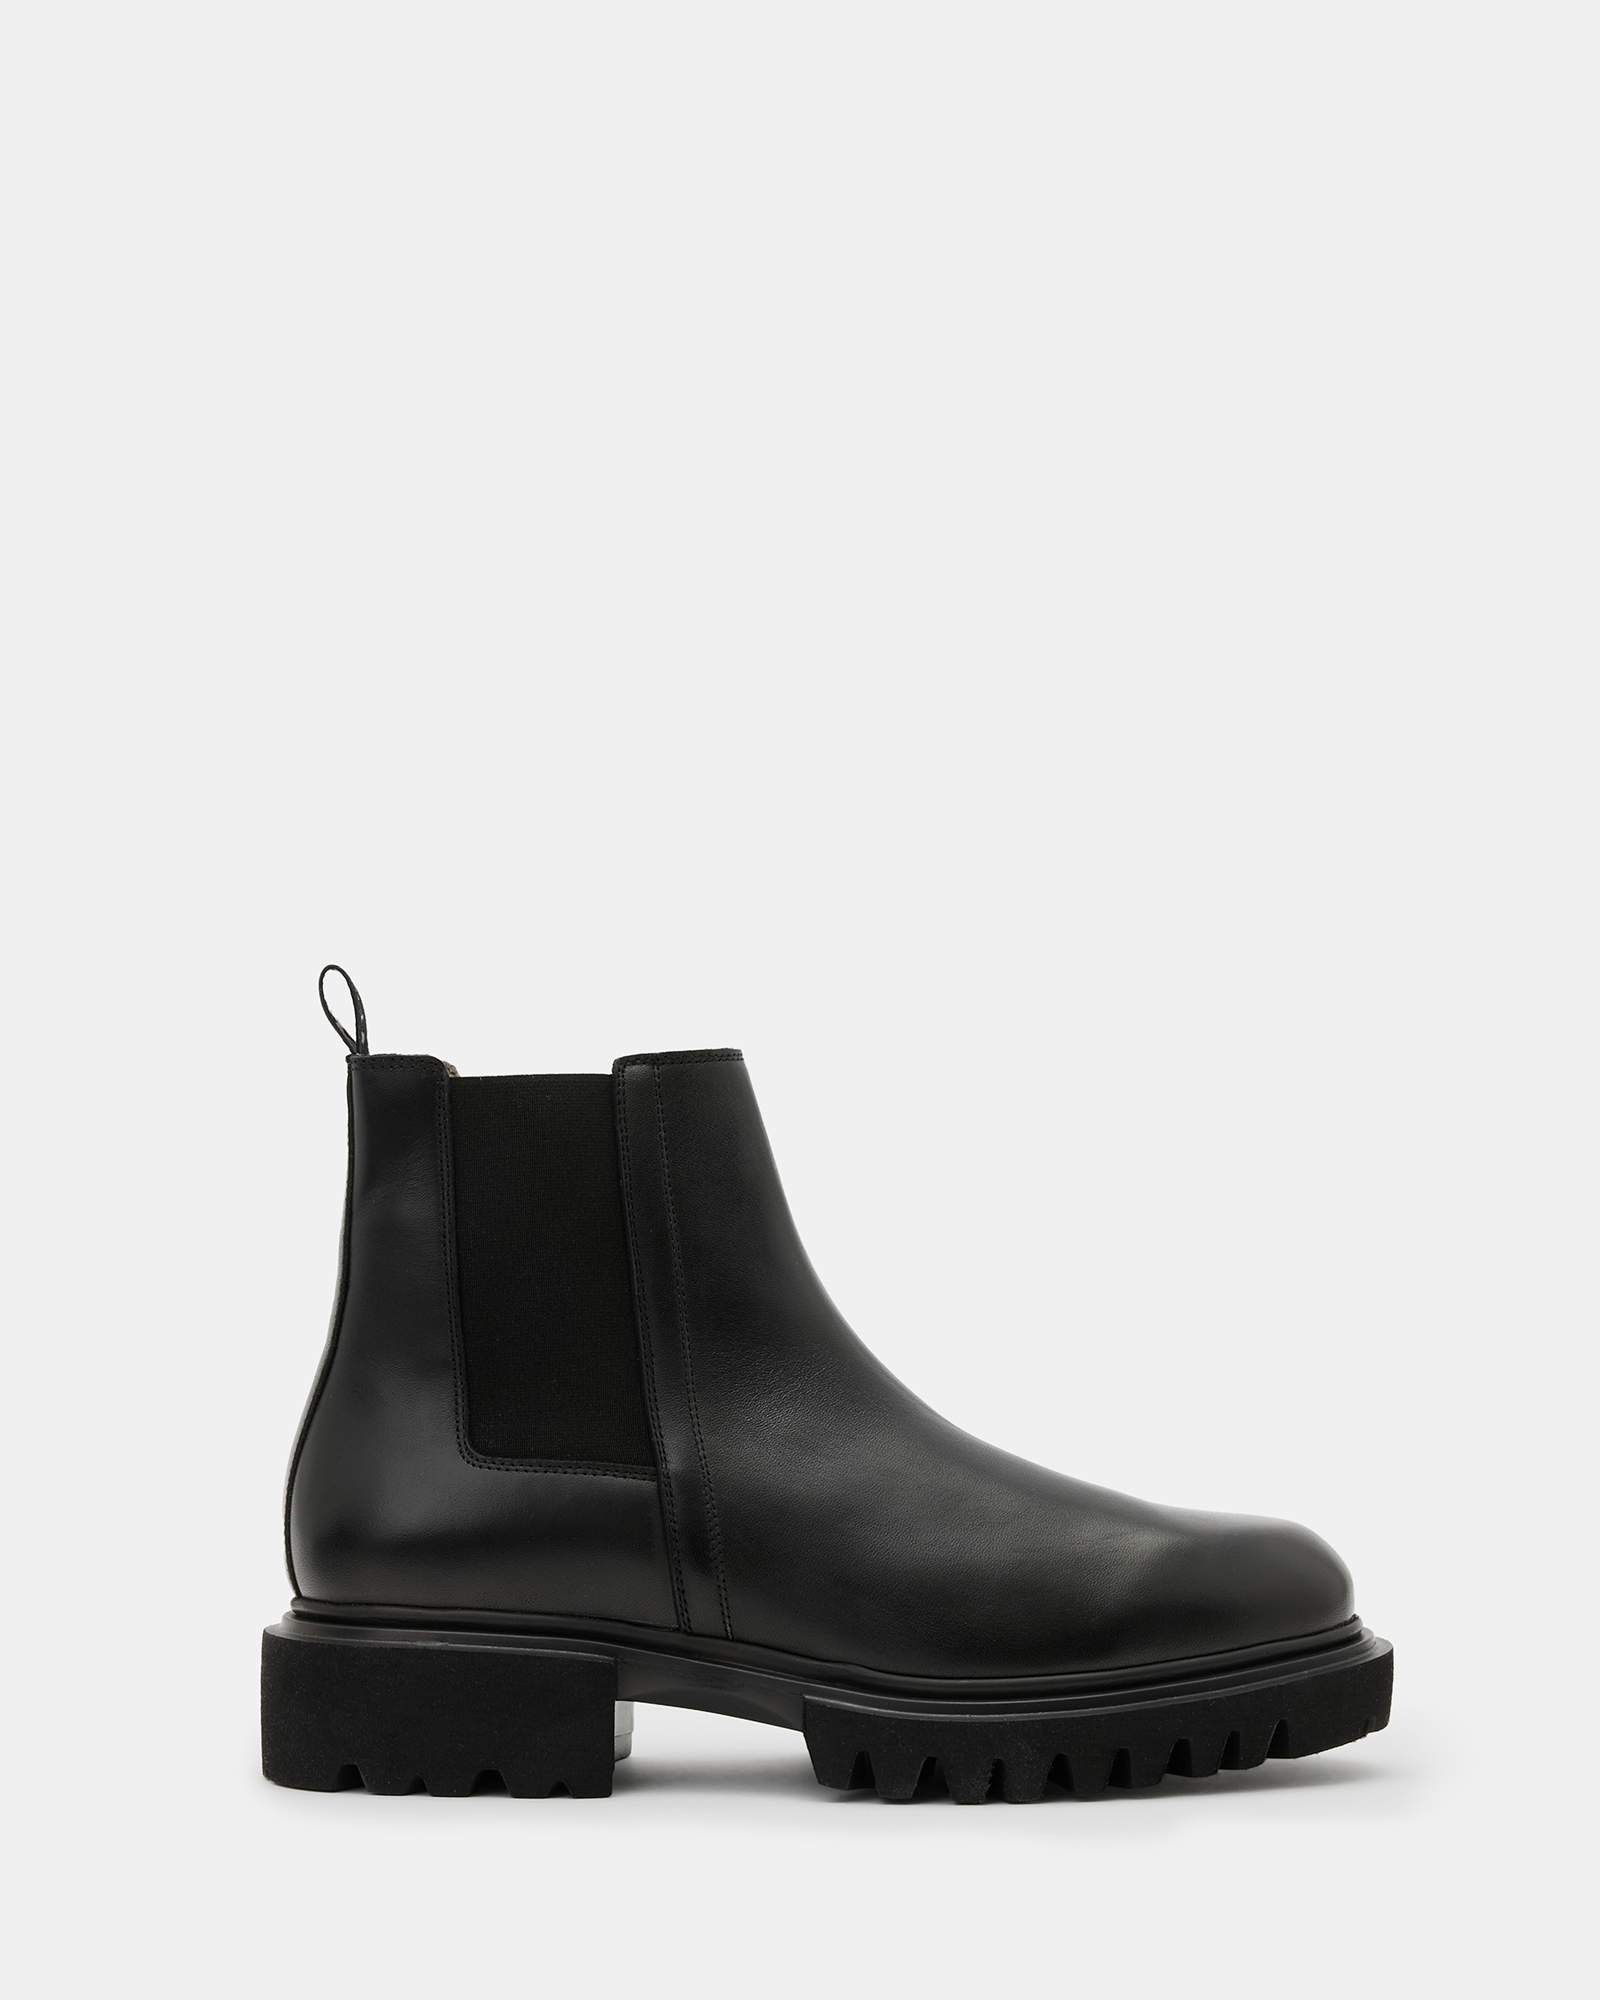 Vince Chunky Leather Boots Black | ALLSAINTS